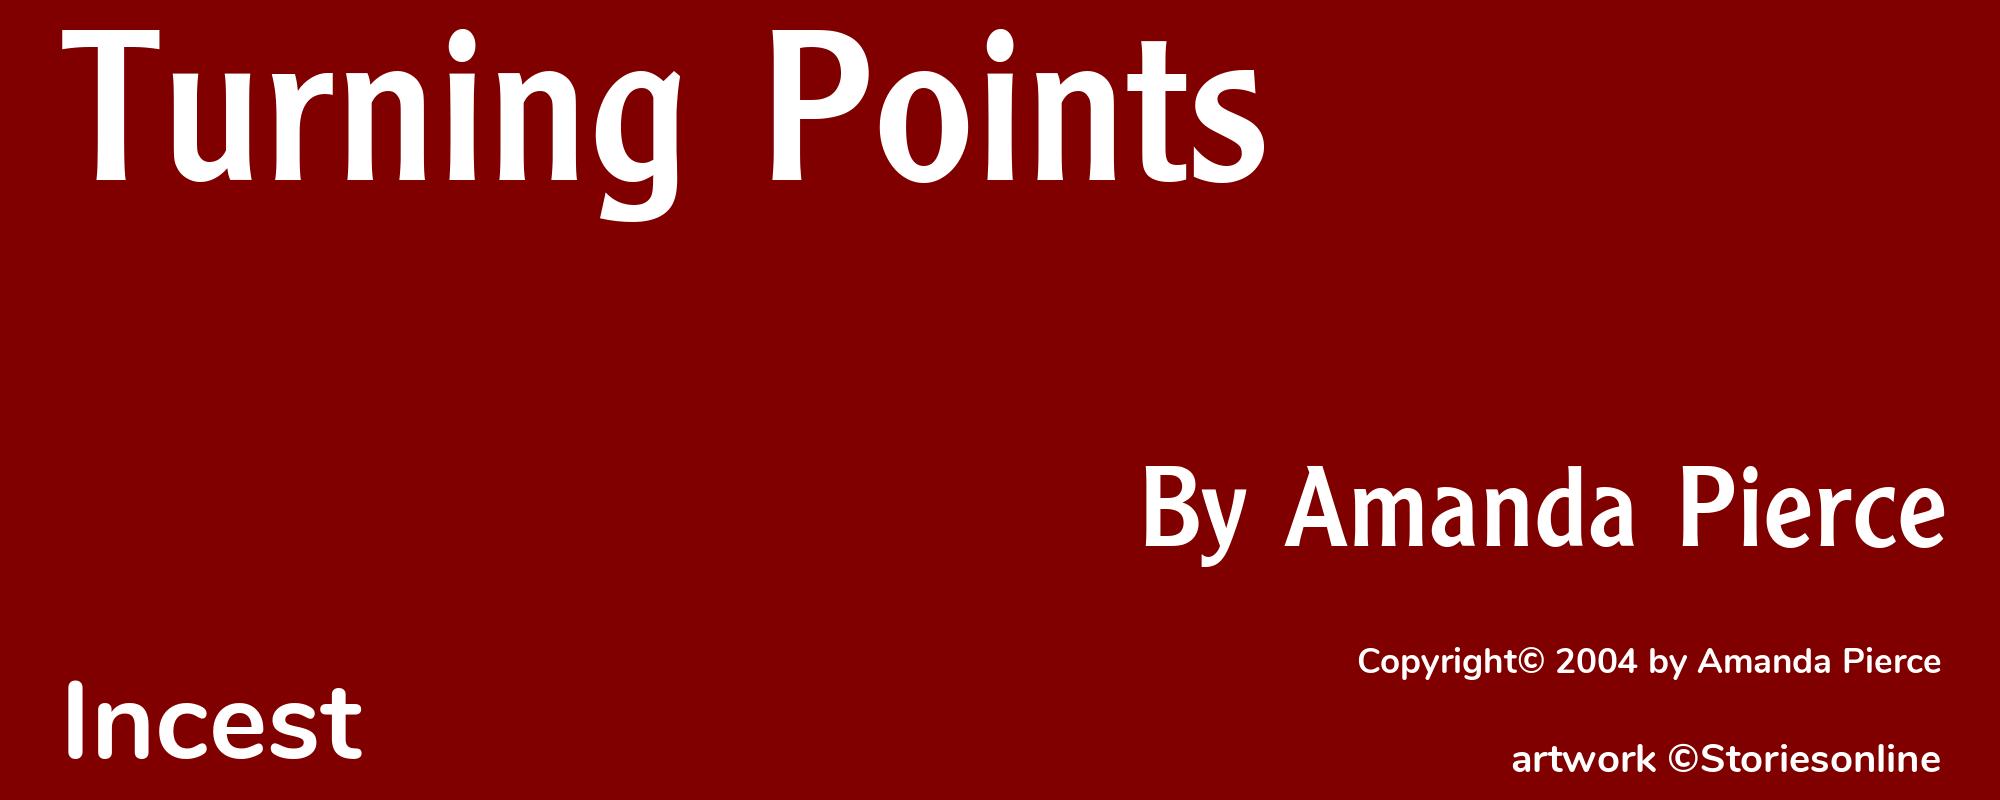 Turning Points - Cover